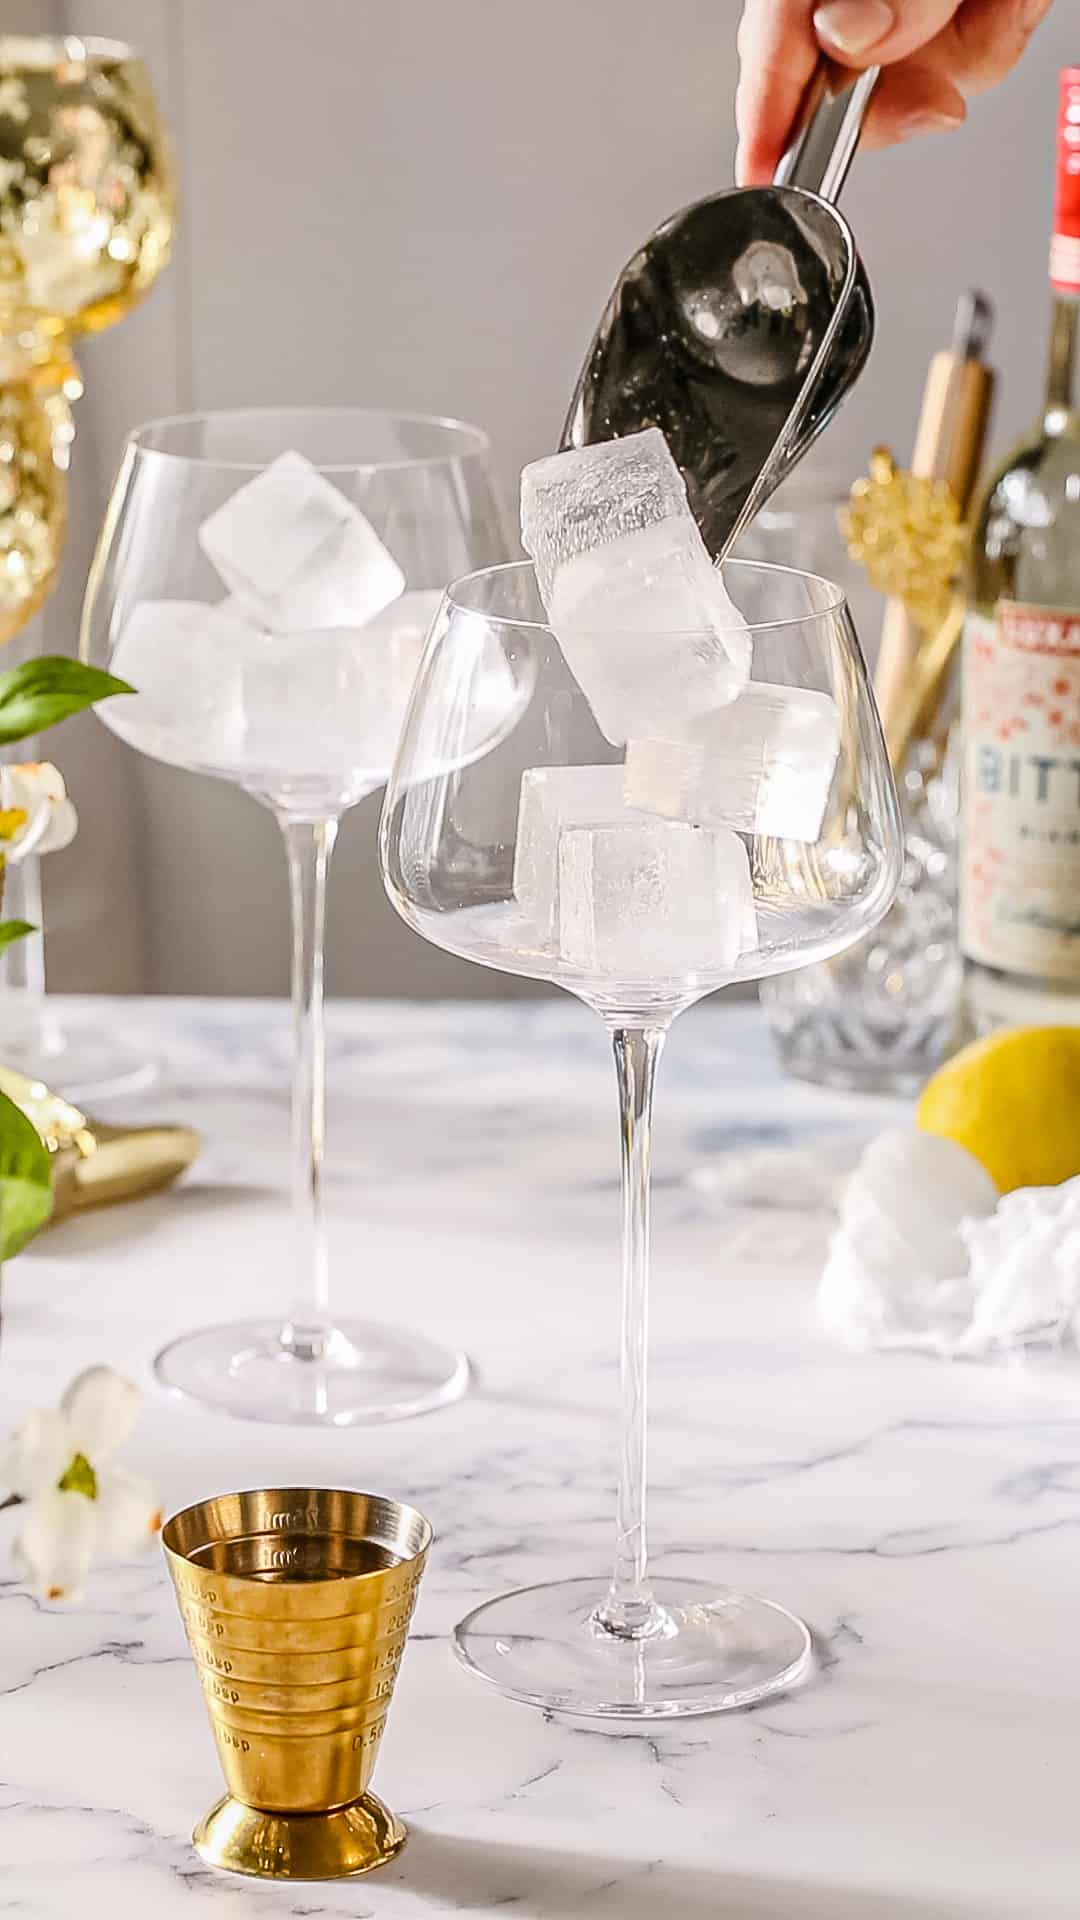 Hand adding ice to a cocktail glass using an ice scoop.